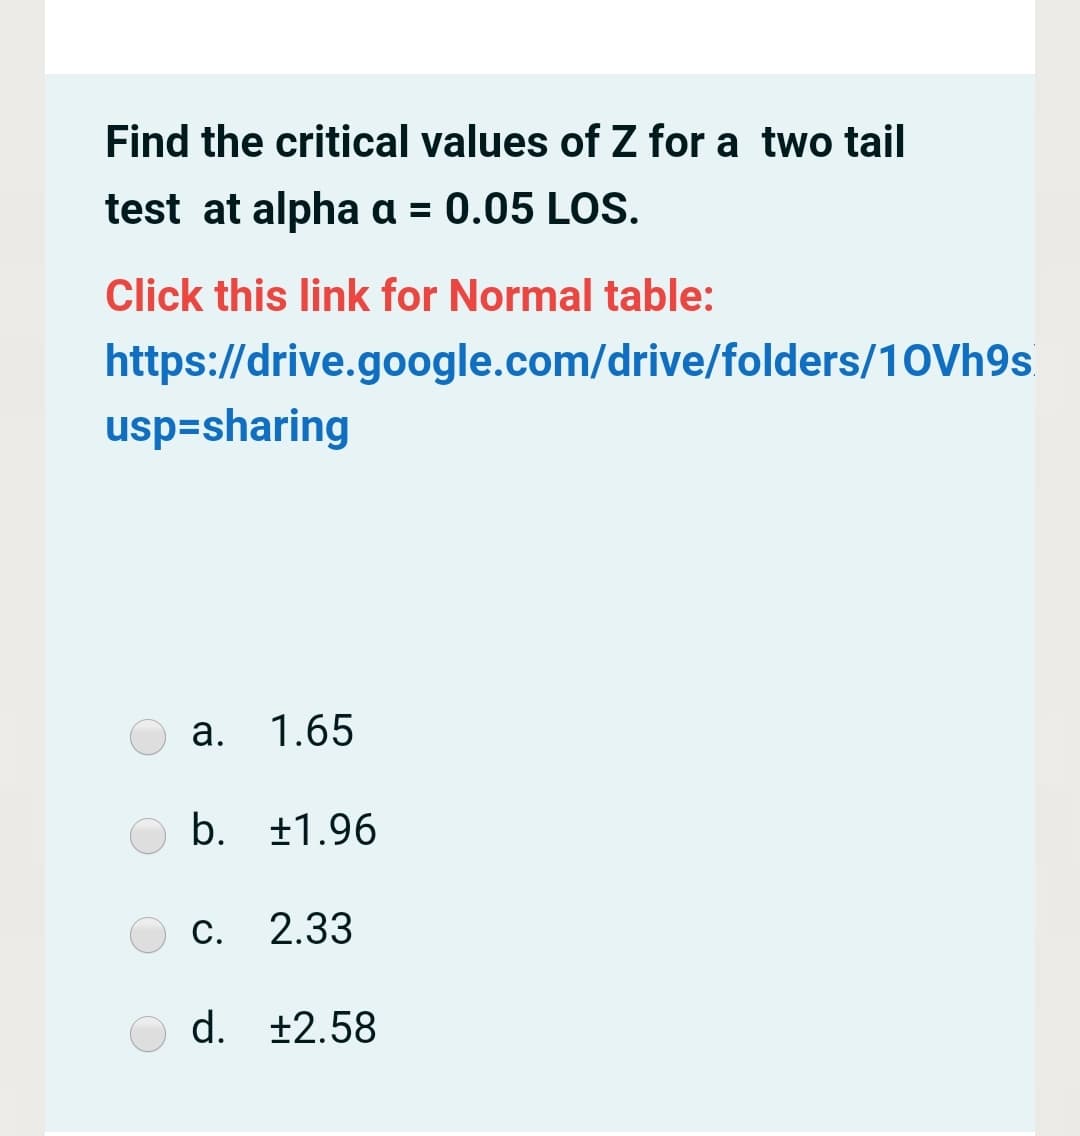 Find the critical values of Z for a two tail
test at alpha a = 0.05 LOS.
Click this link for Normal table:
https://drive.google.com/drive/folders/10Vh9s
usp=sharing
а.
1.65
b. +1.96
С. 2.33
d. +2.58
